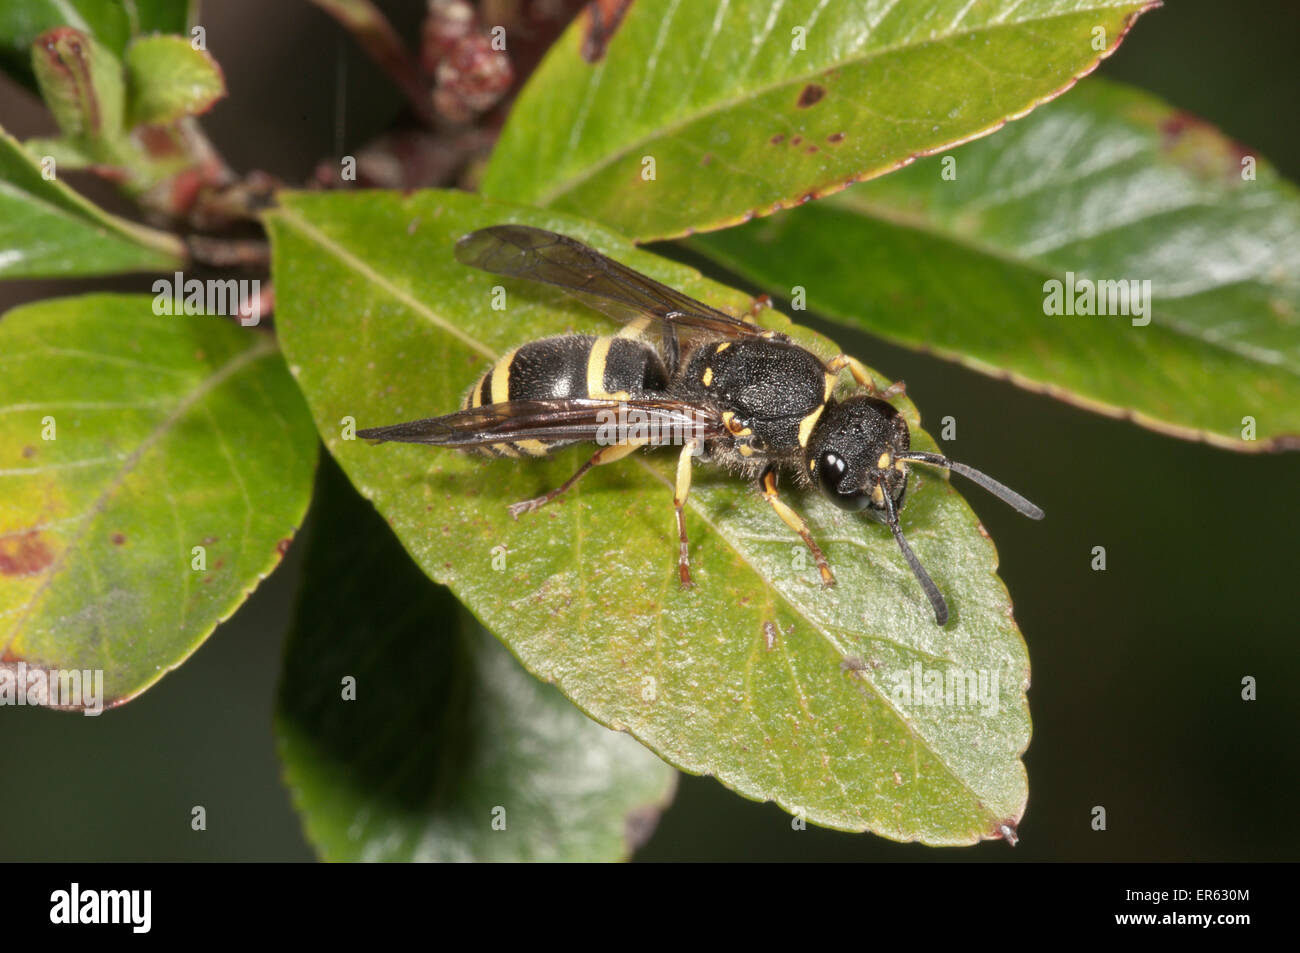 Potter Wasp (Ancistrocerus nigricornis), Baden-Württemberg, Germany Stock Photo